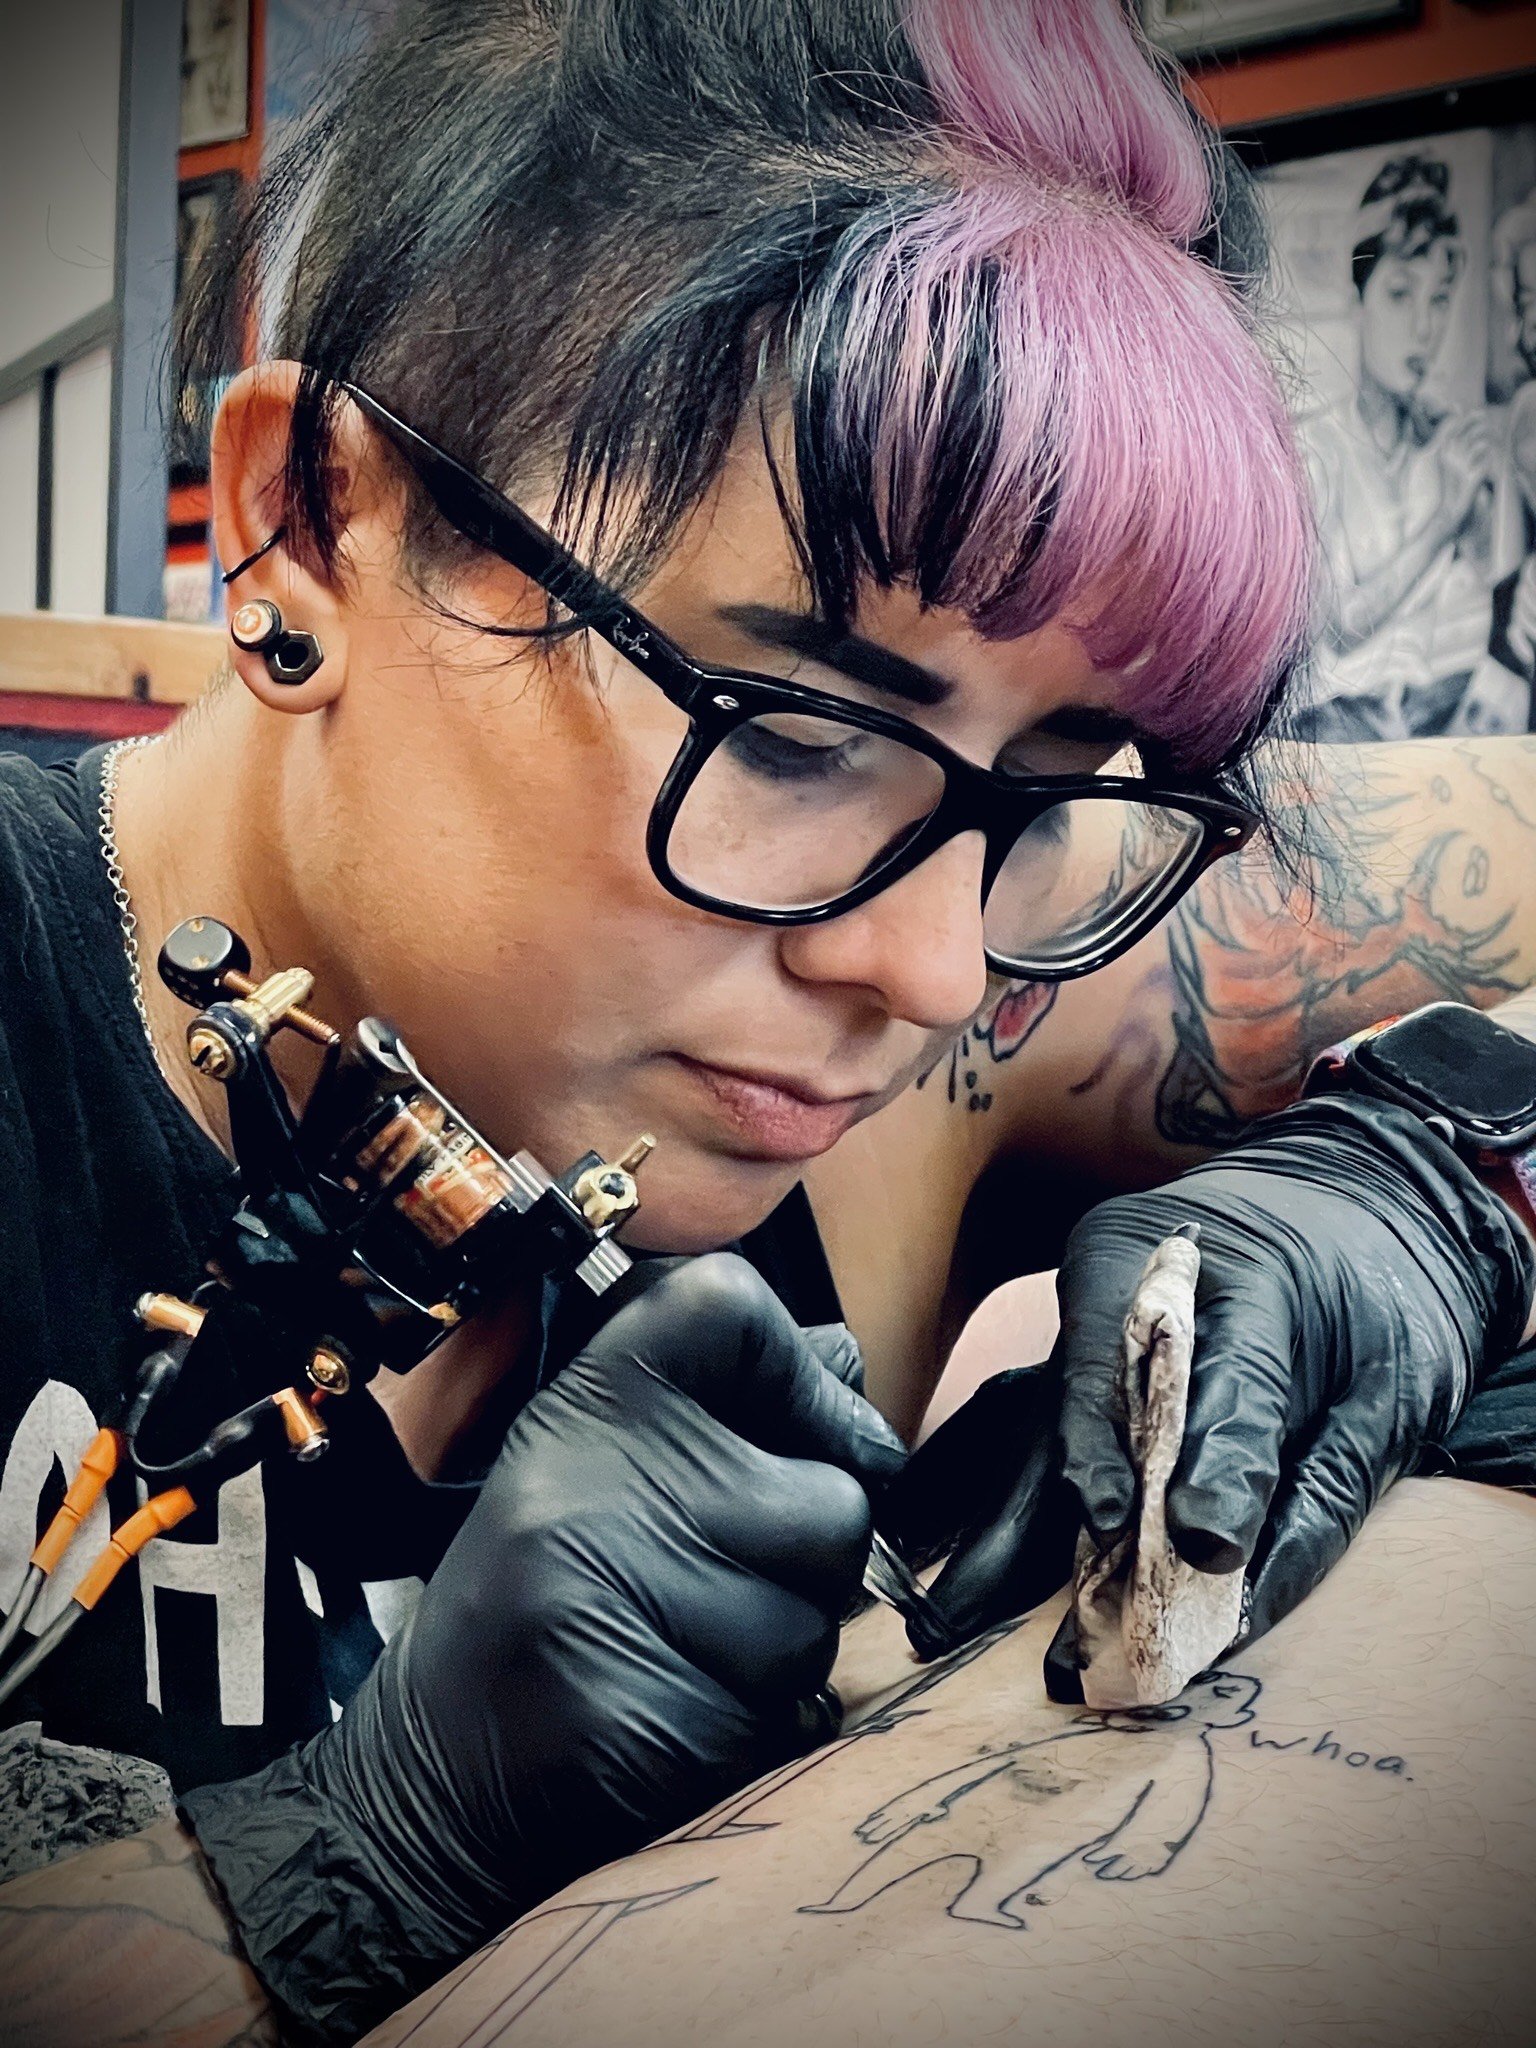 Best and Worst Type of Tattoos to Get According to Artists